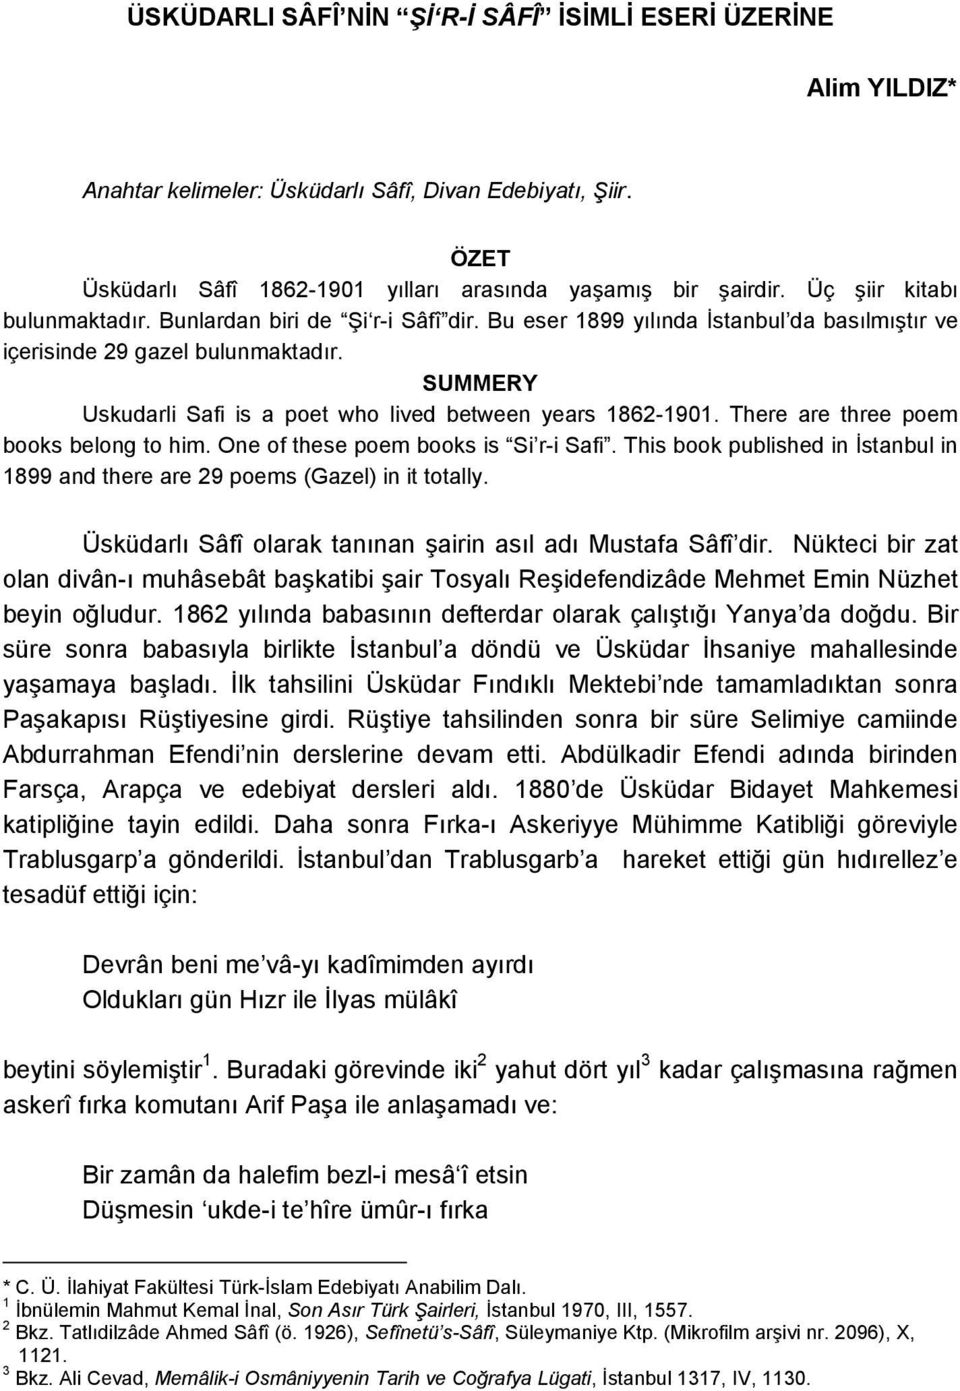 SUMMERY Uskudarli Safi is a poet who lived between years 1862-1901. There are three poem books belong to him. One of these poem books is Si r-i Safi.